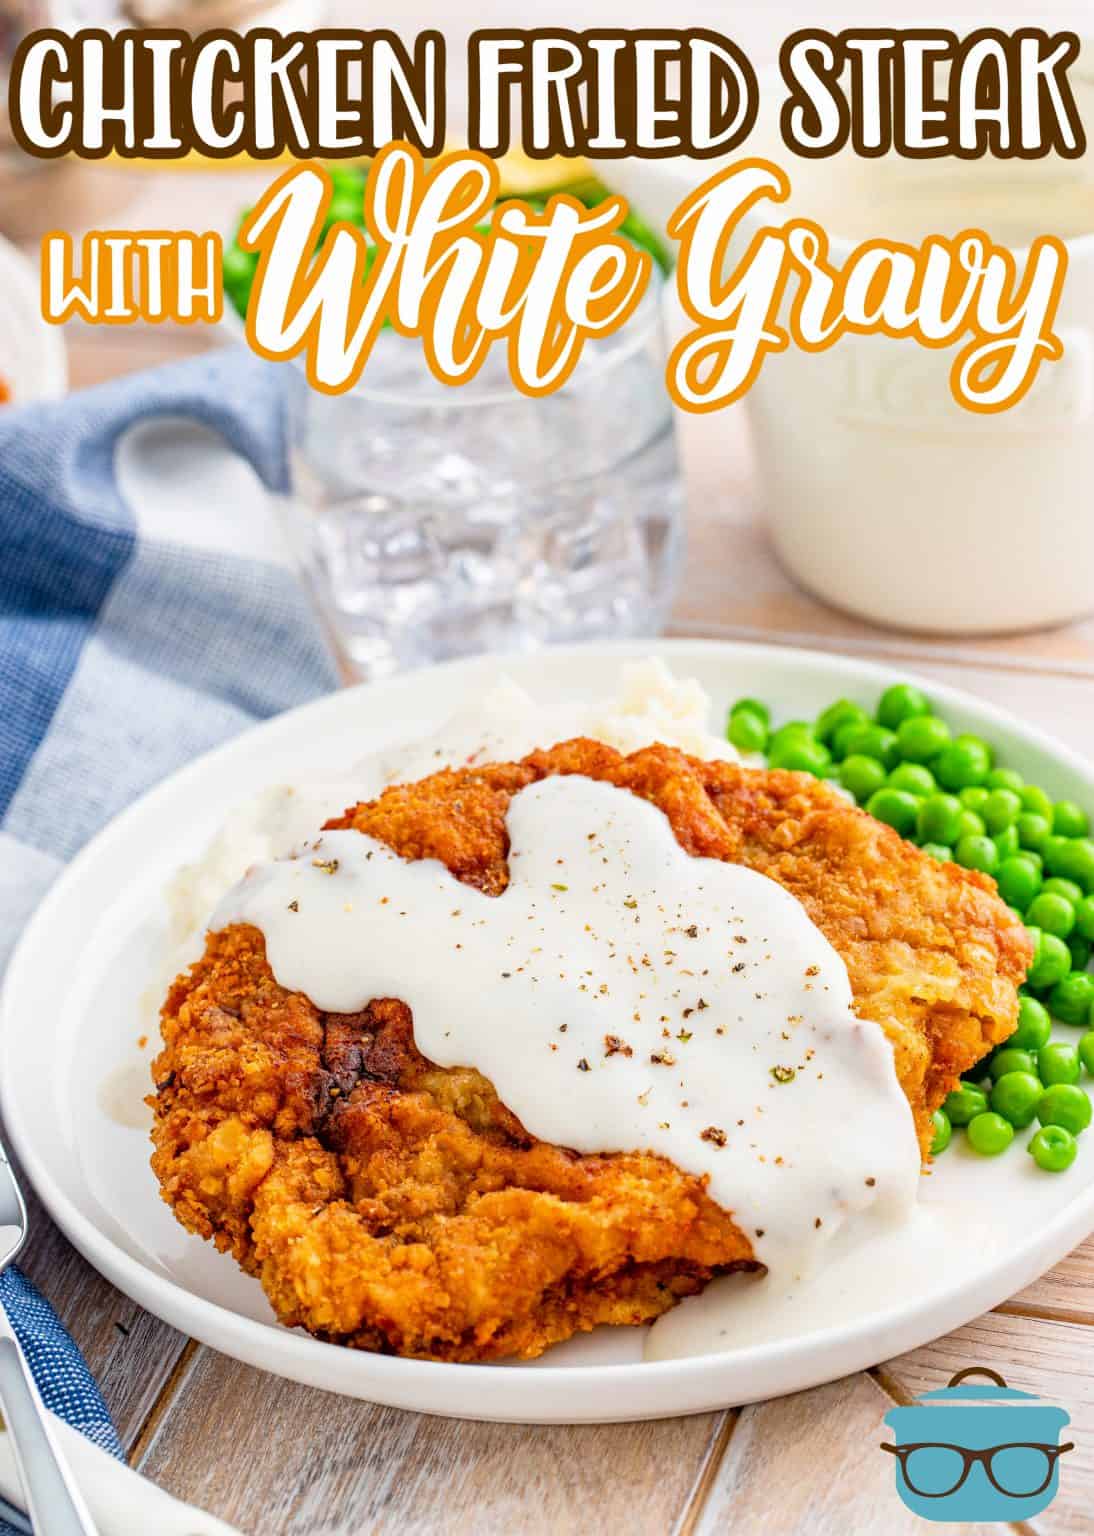 Chicken Fried Steak with Sawmill Gravy by The Country Cook - WEEKEND POTLUCK 470